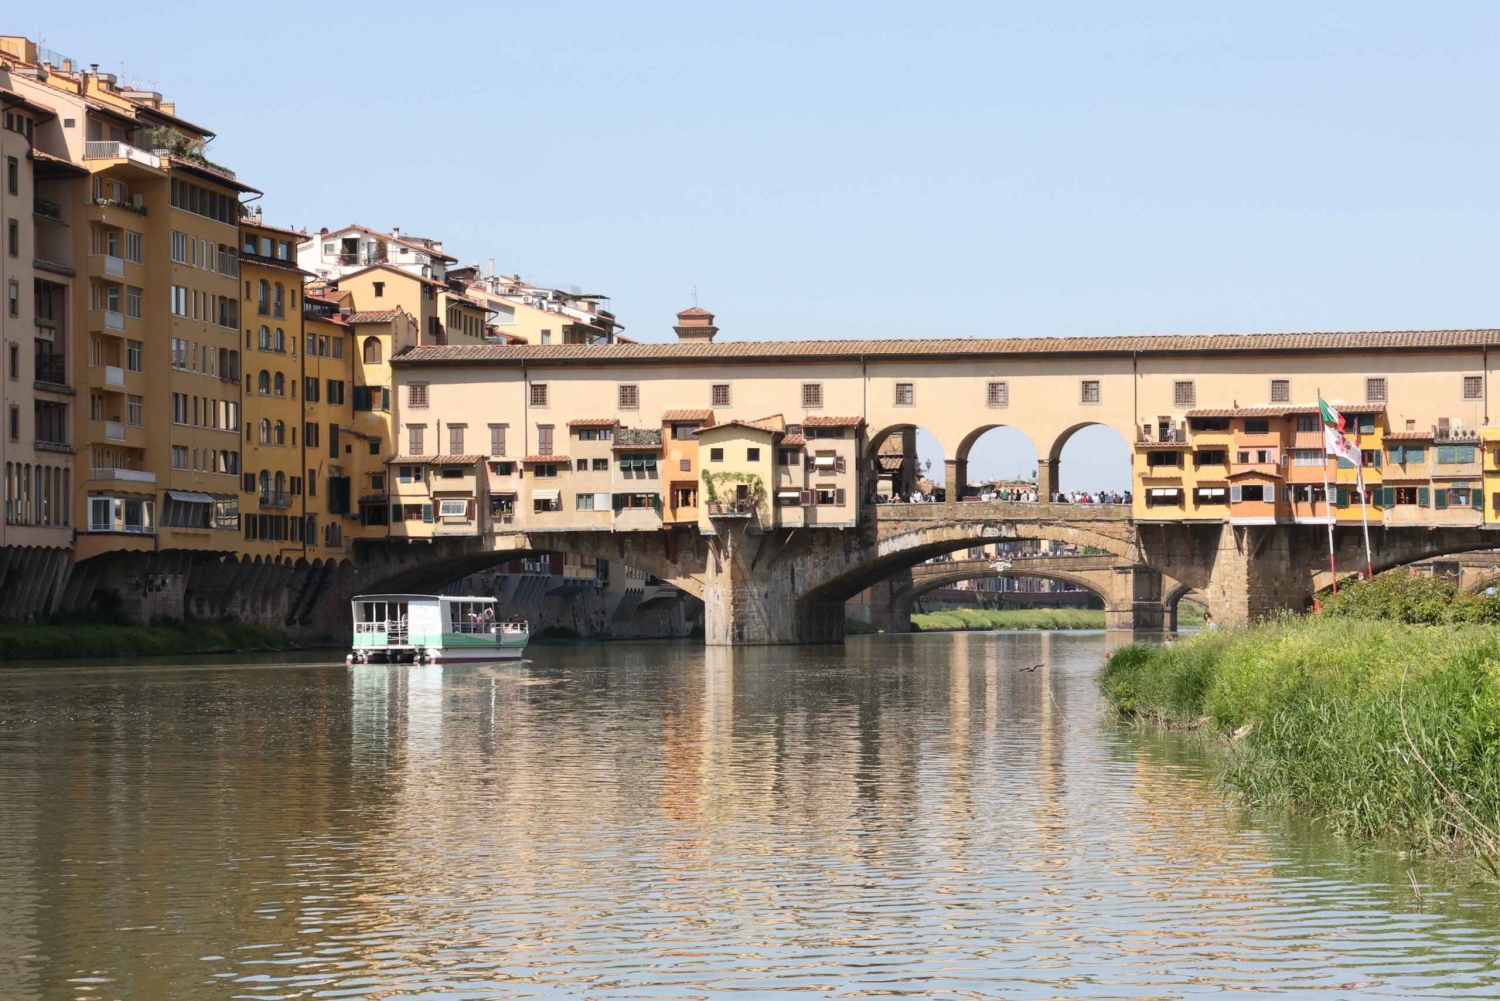 Firenze: Arno River Sightseeing Cruise with Commentary